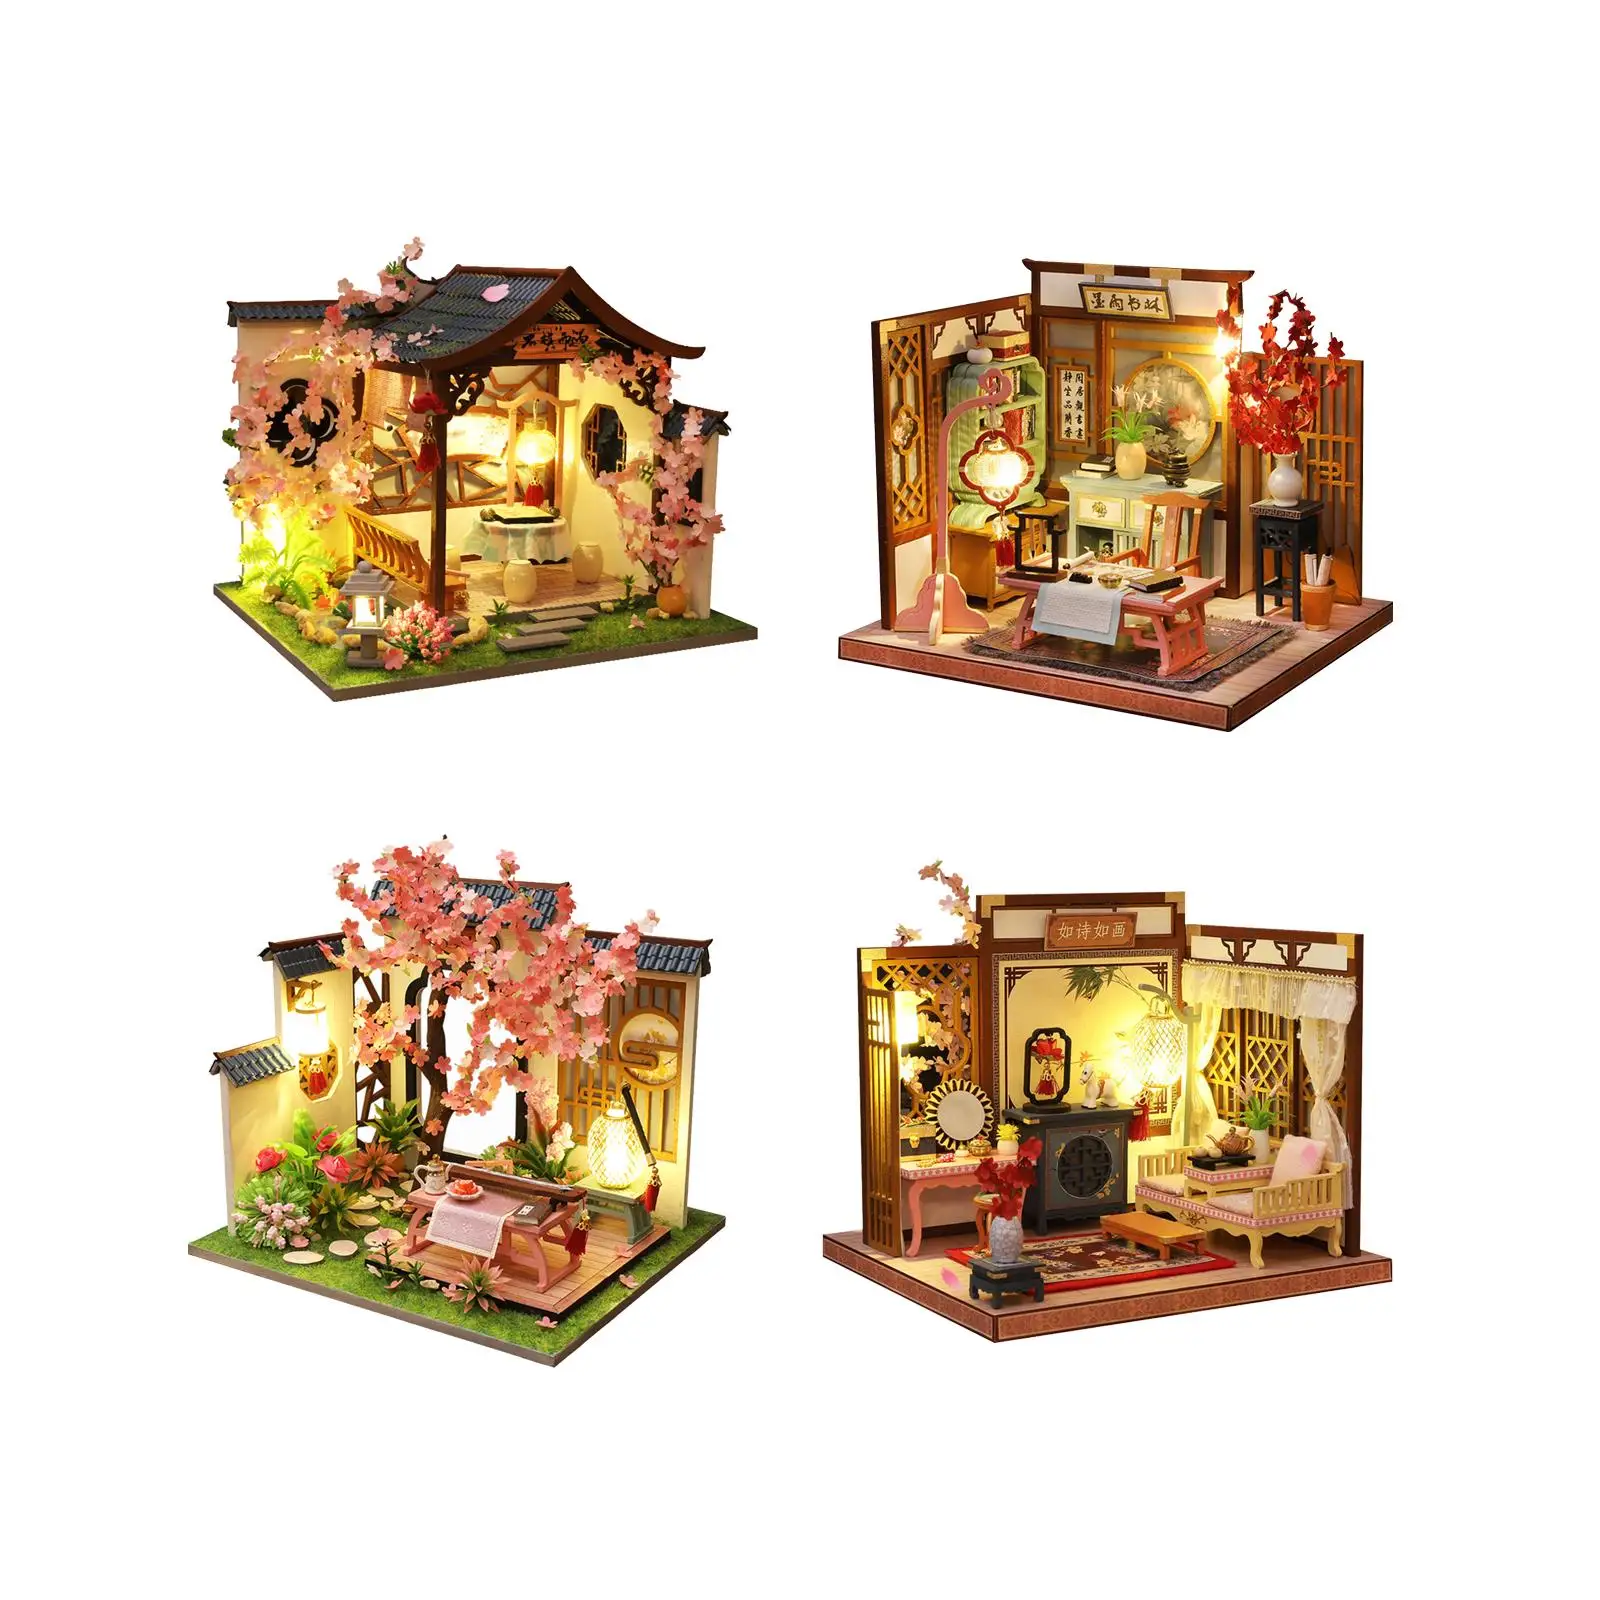 Mini House Kits Dollhouse DIY Kits Building Set Wooden Miniature Dollhouse DIY Kits for Adults Teens Toddlers Boys Easter Gifts